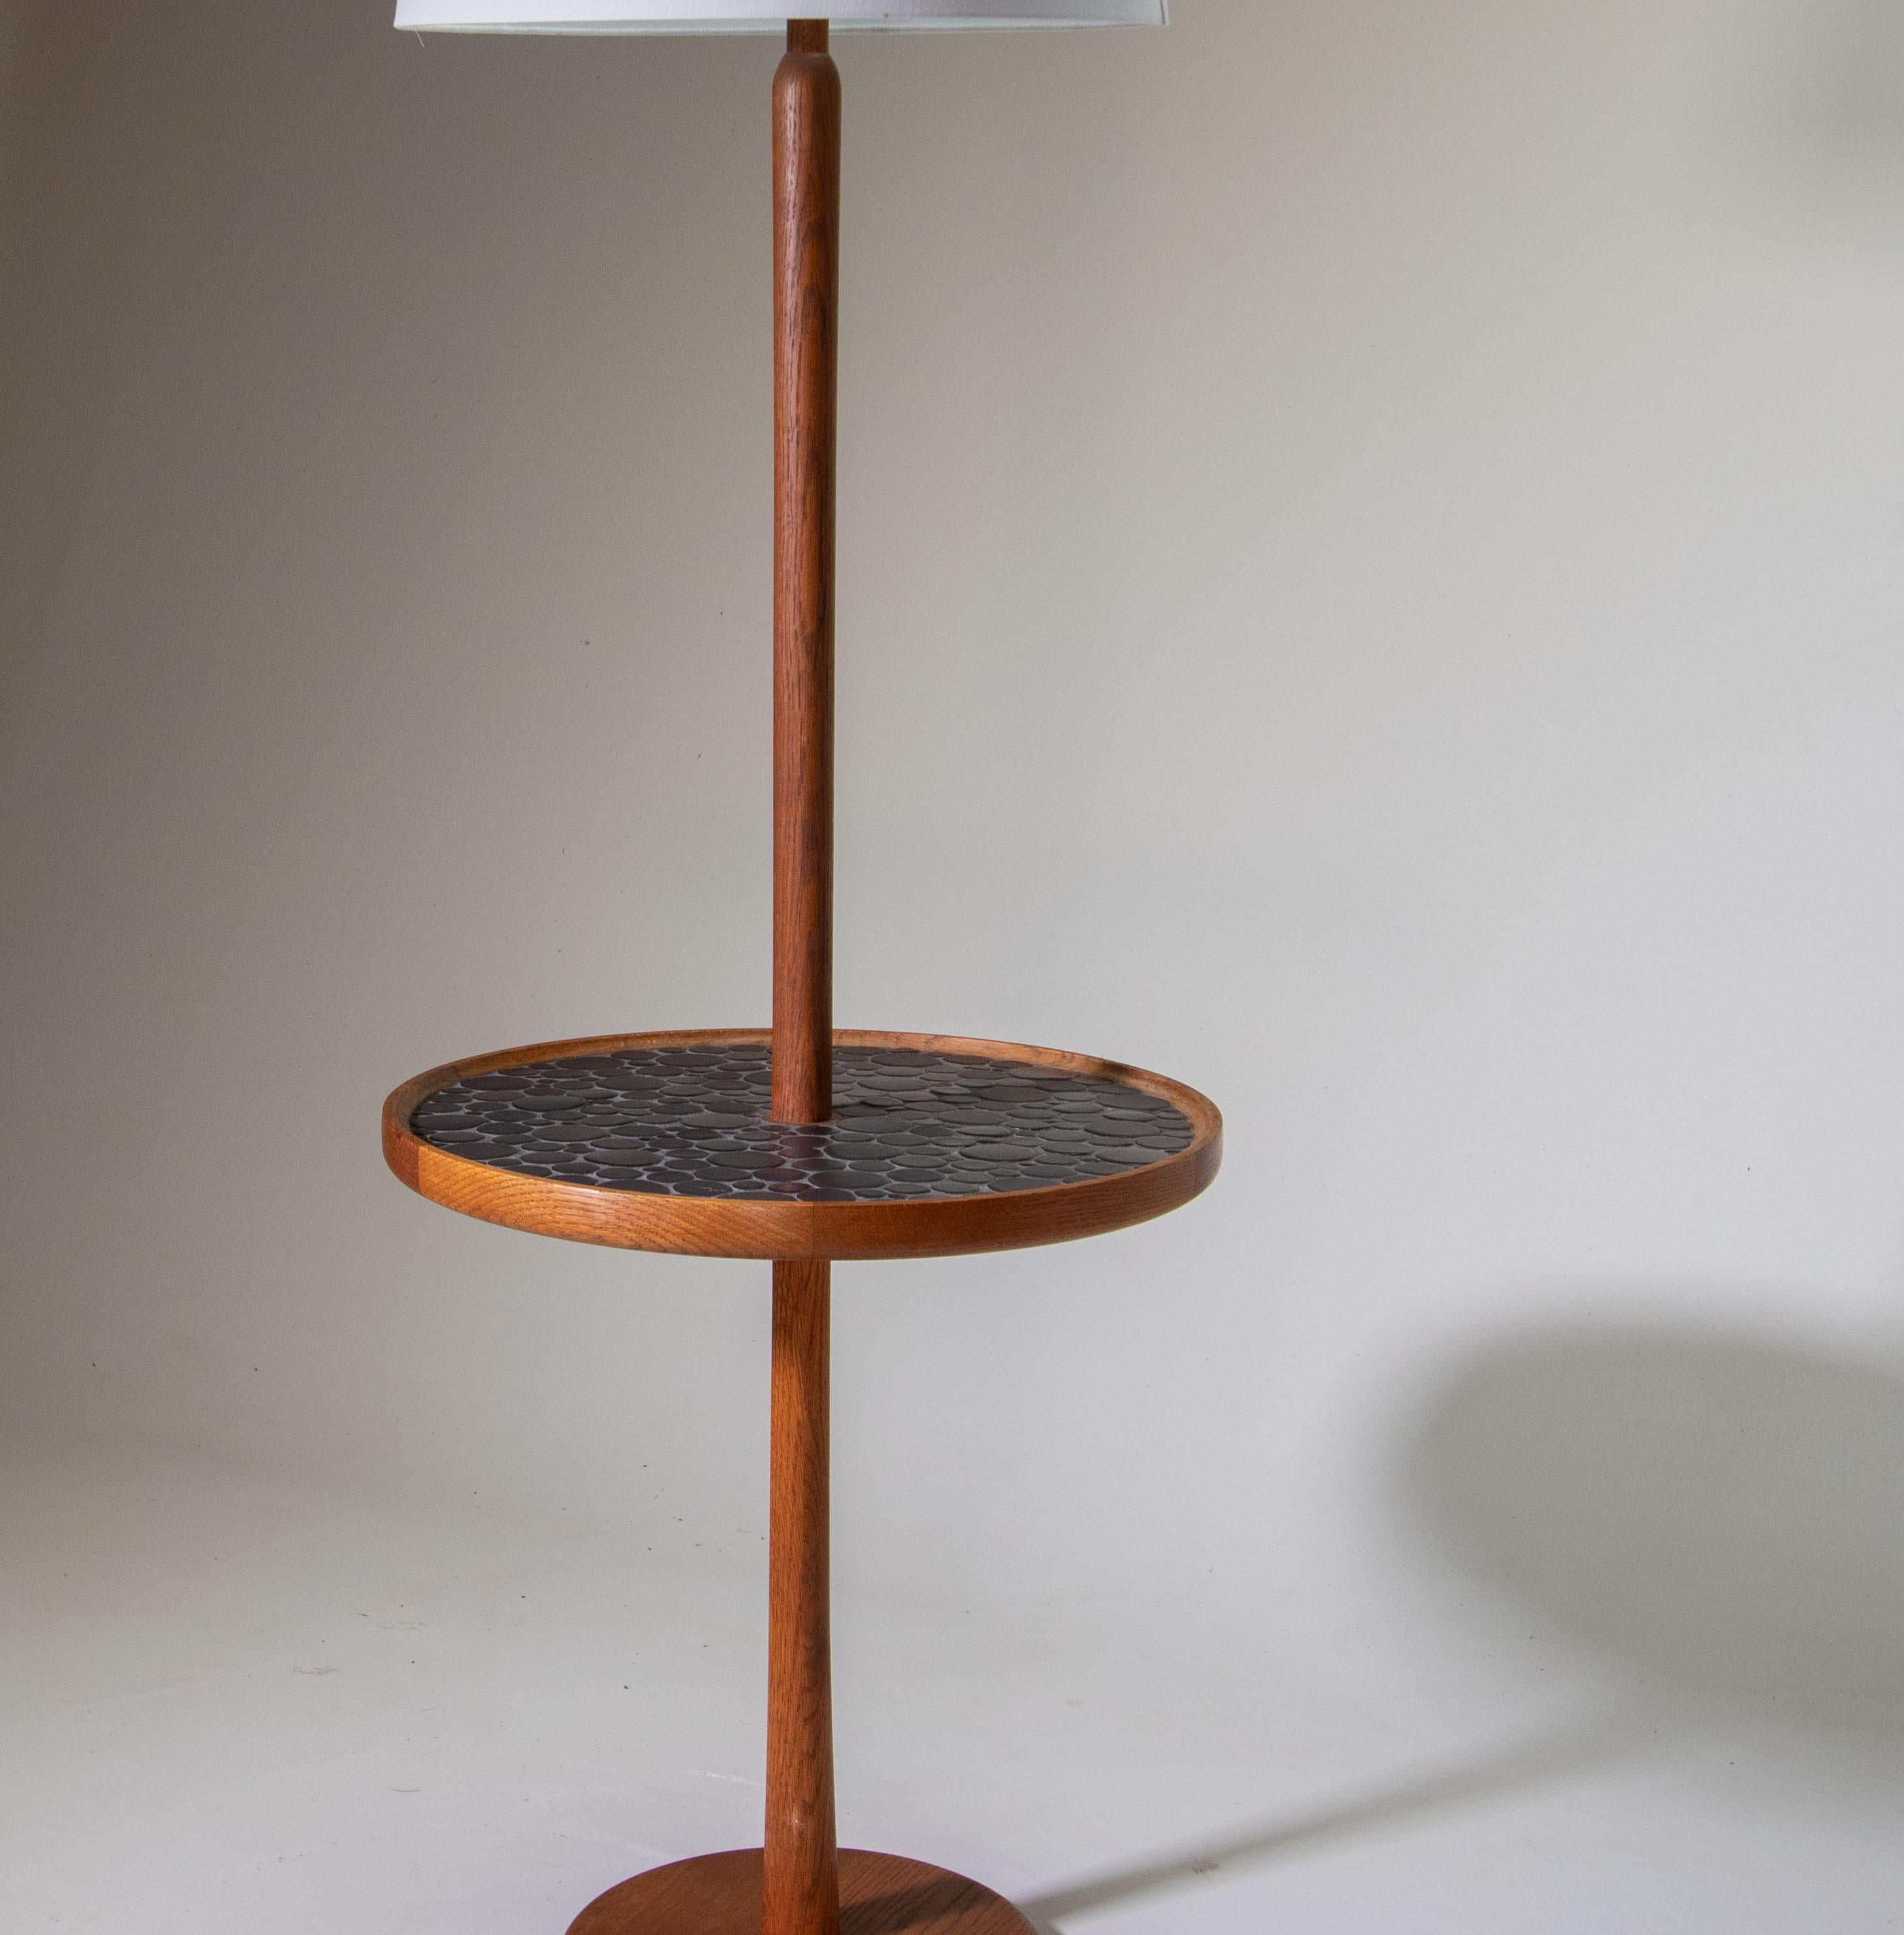 A 1960s W4 floor lamp designed by Jane and Gordon Martz for Marshall Studios featuring coin shaped tiles in a gray color way. The tile table features a solid teak raised lip around the table portion as well solid teak stem and base. A great lamp in